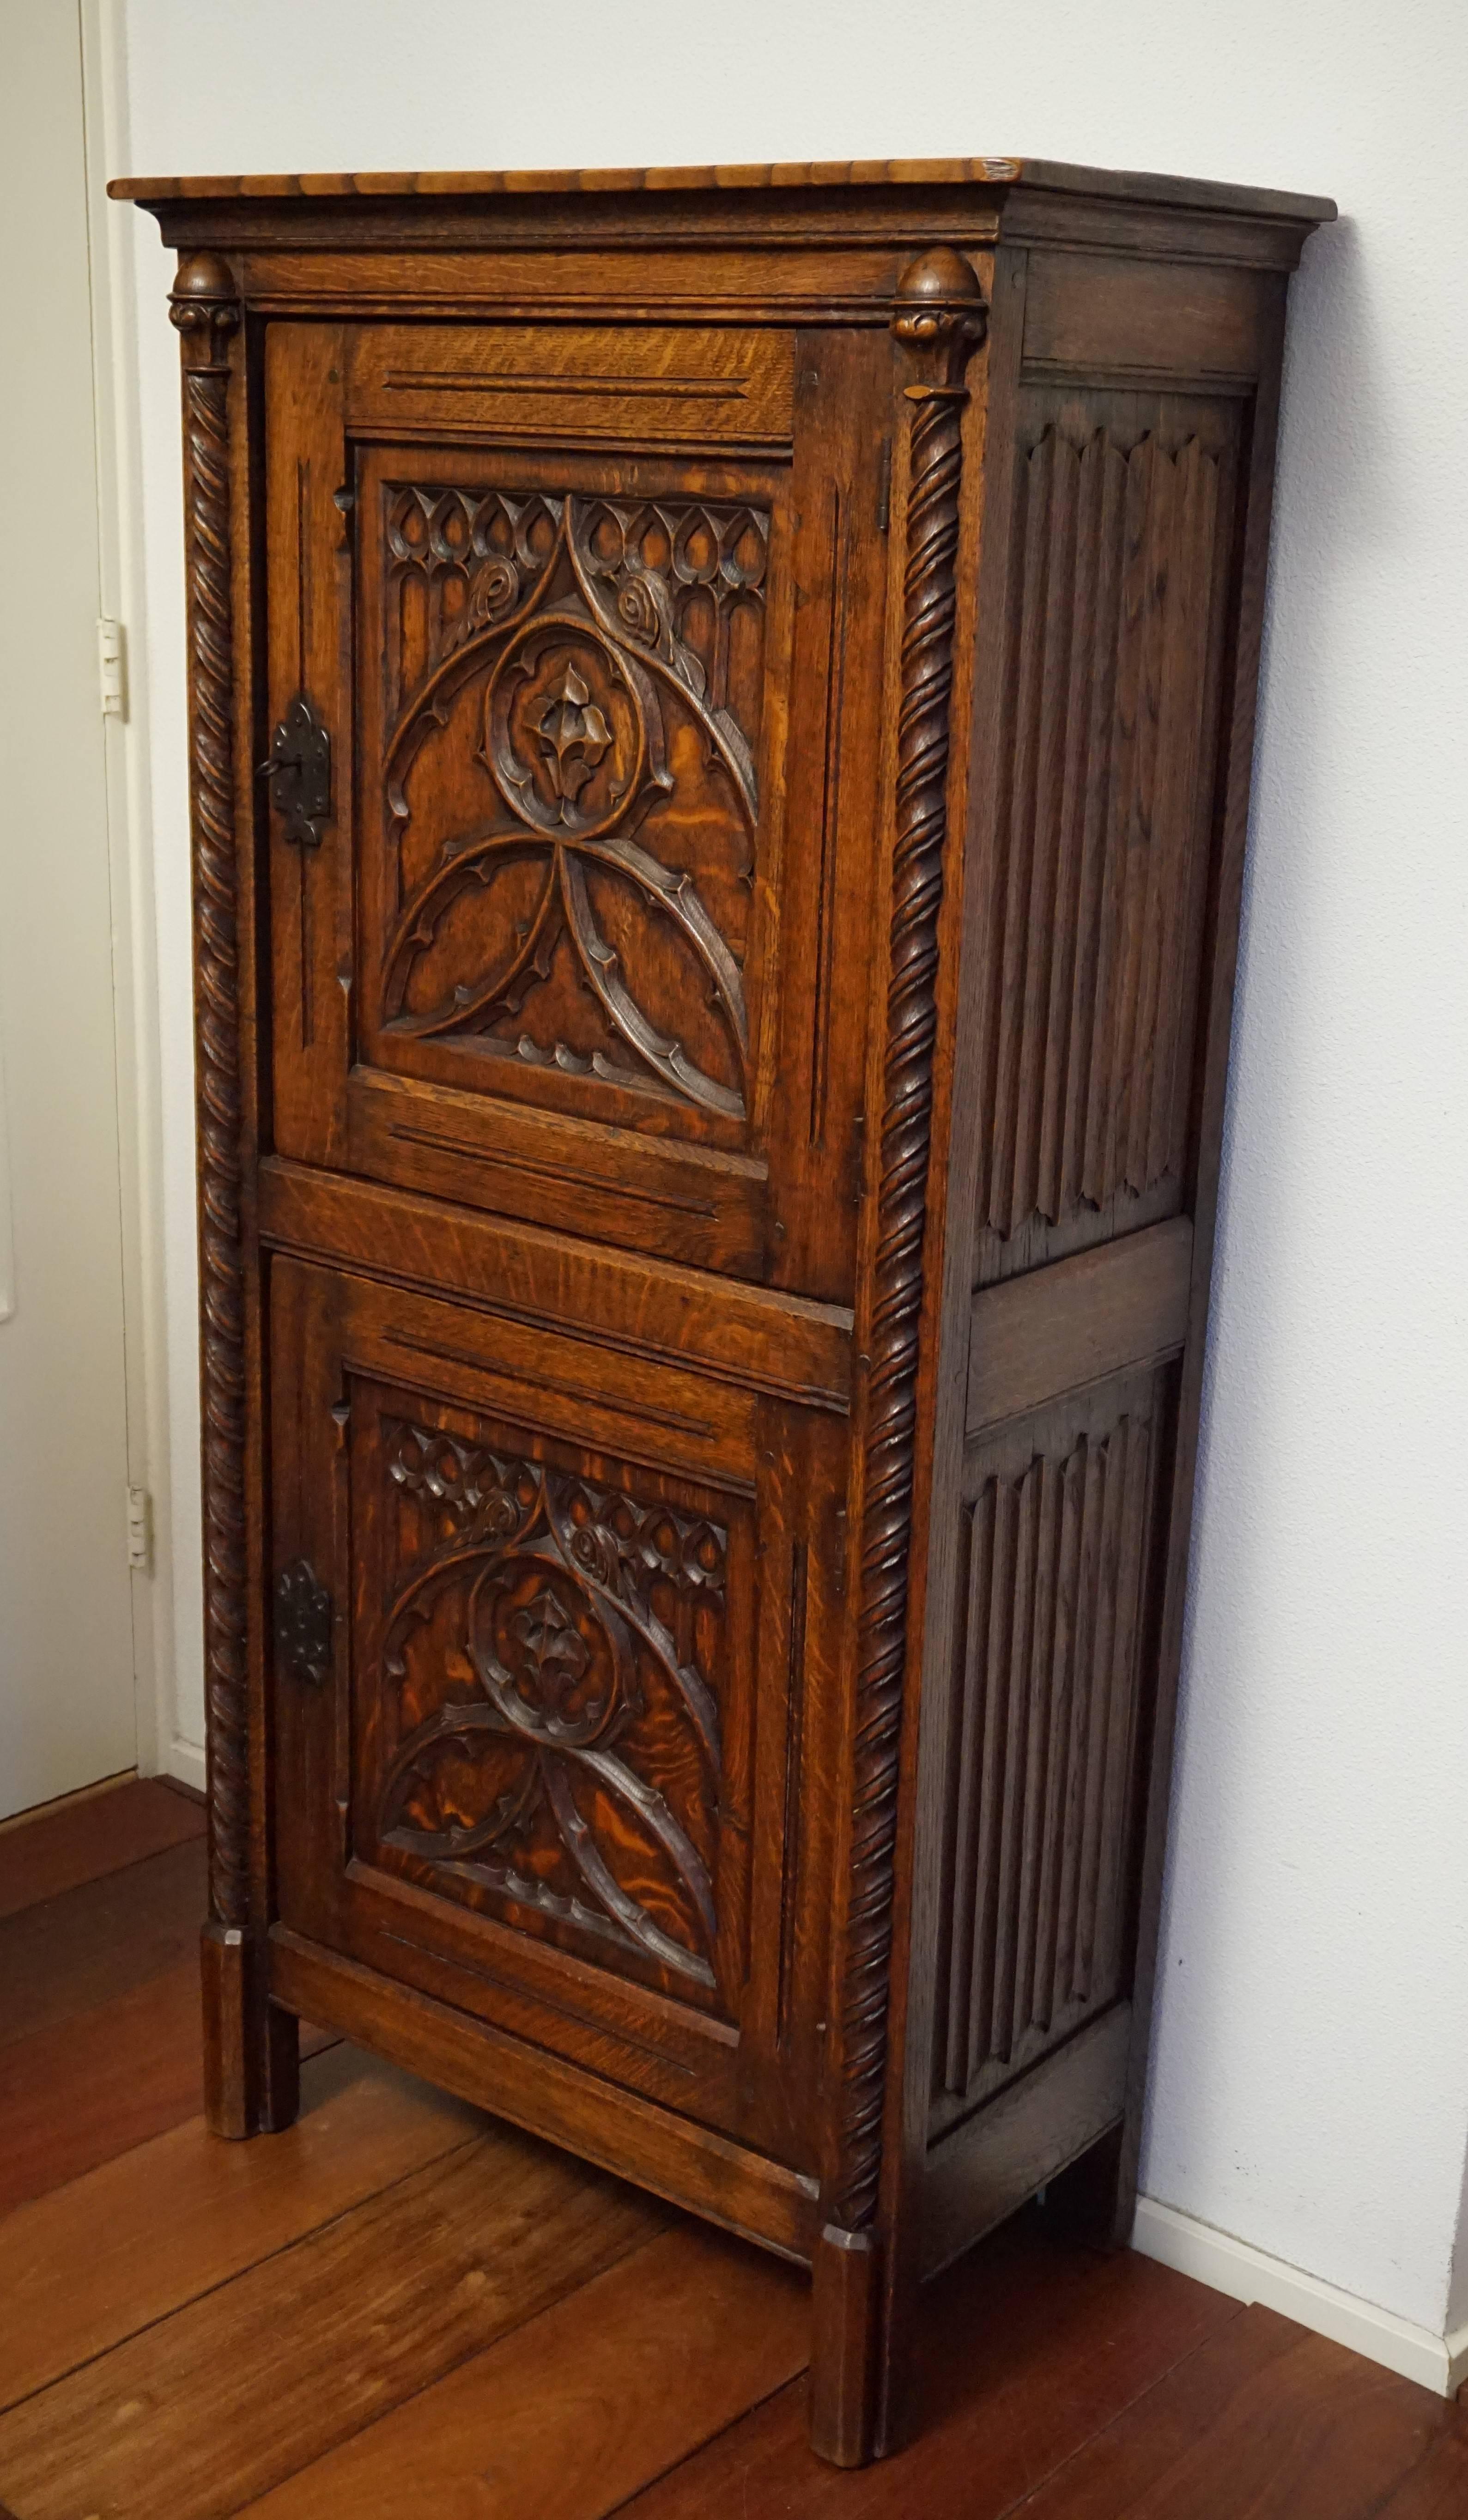 Hand-Carved Gothic Revival Bookcase Carved Antique Cabinet with Wrought Iron Lock Plates